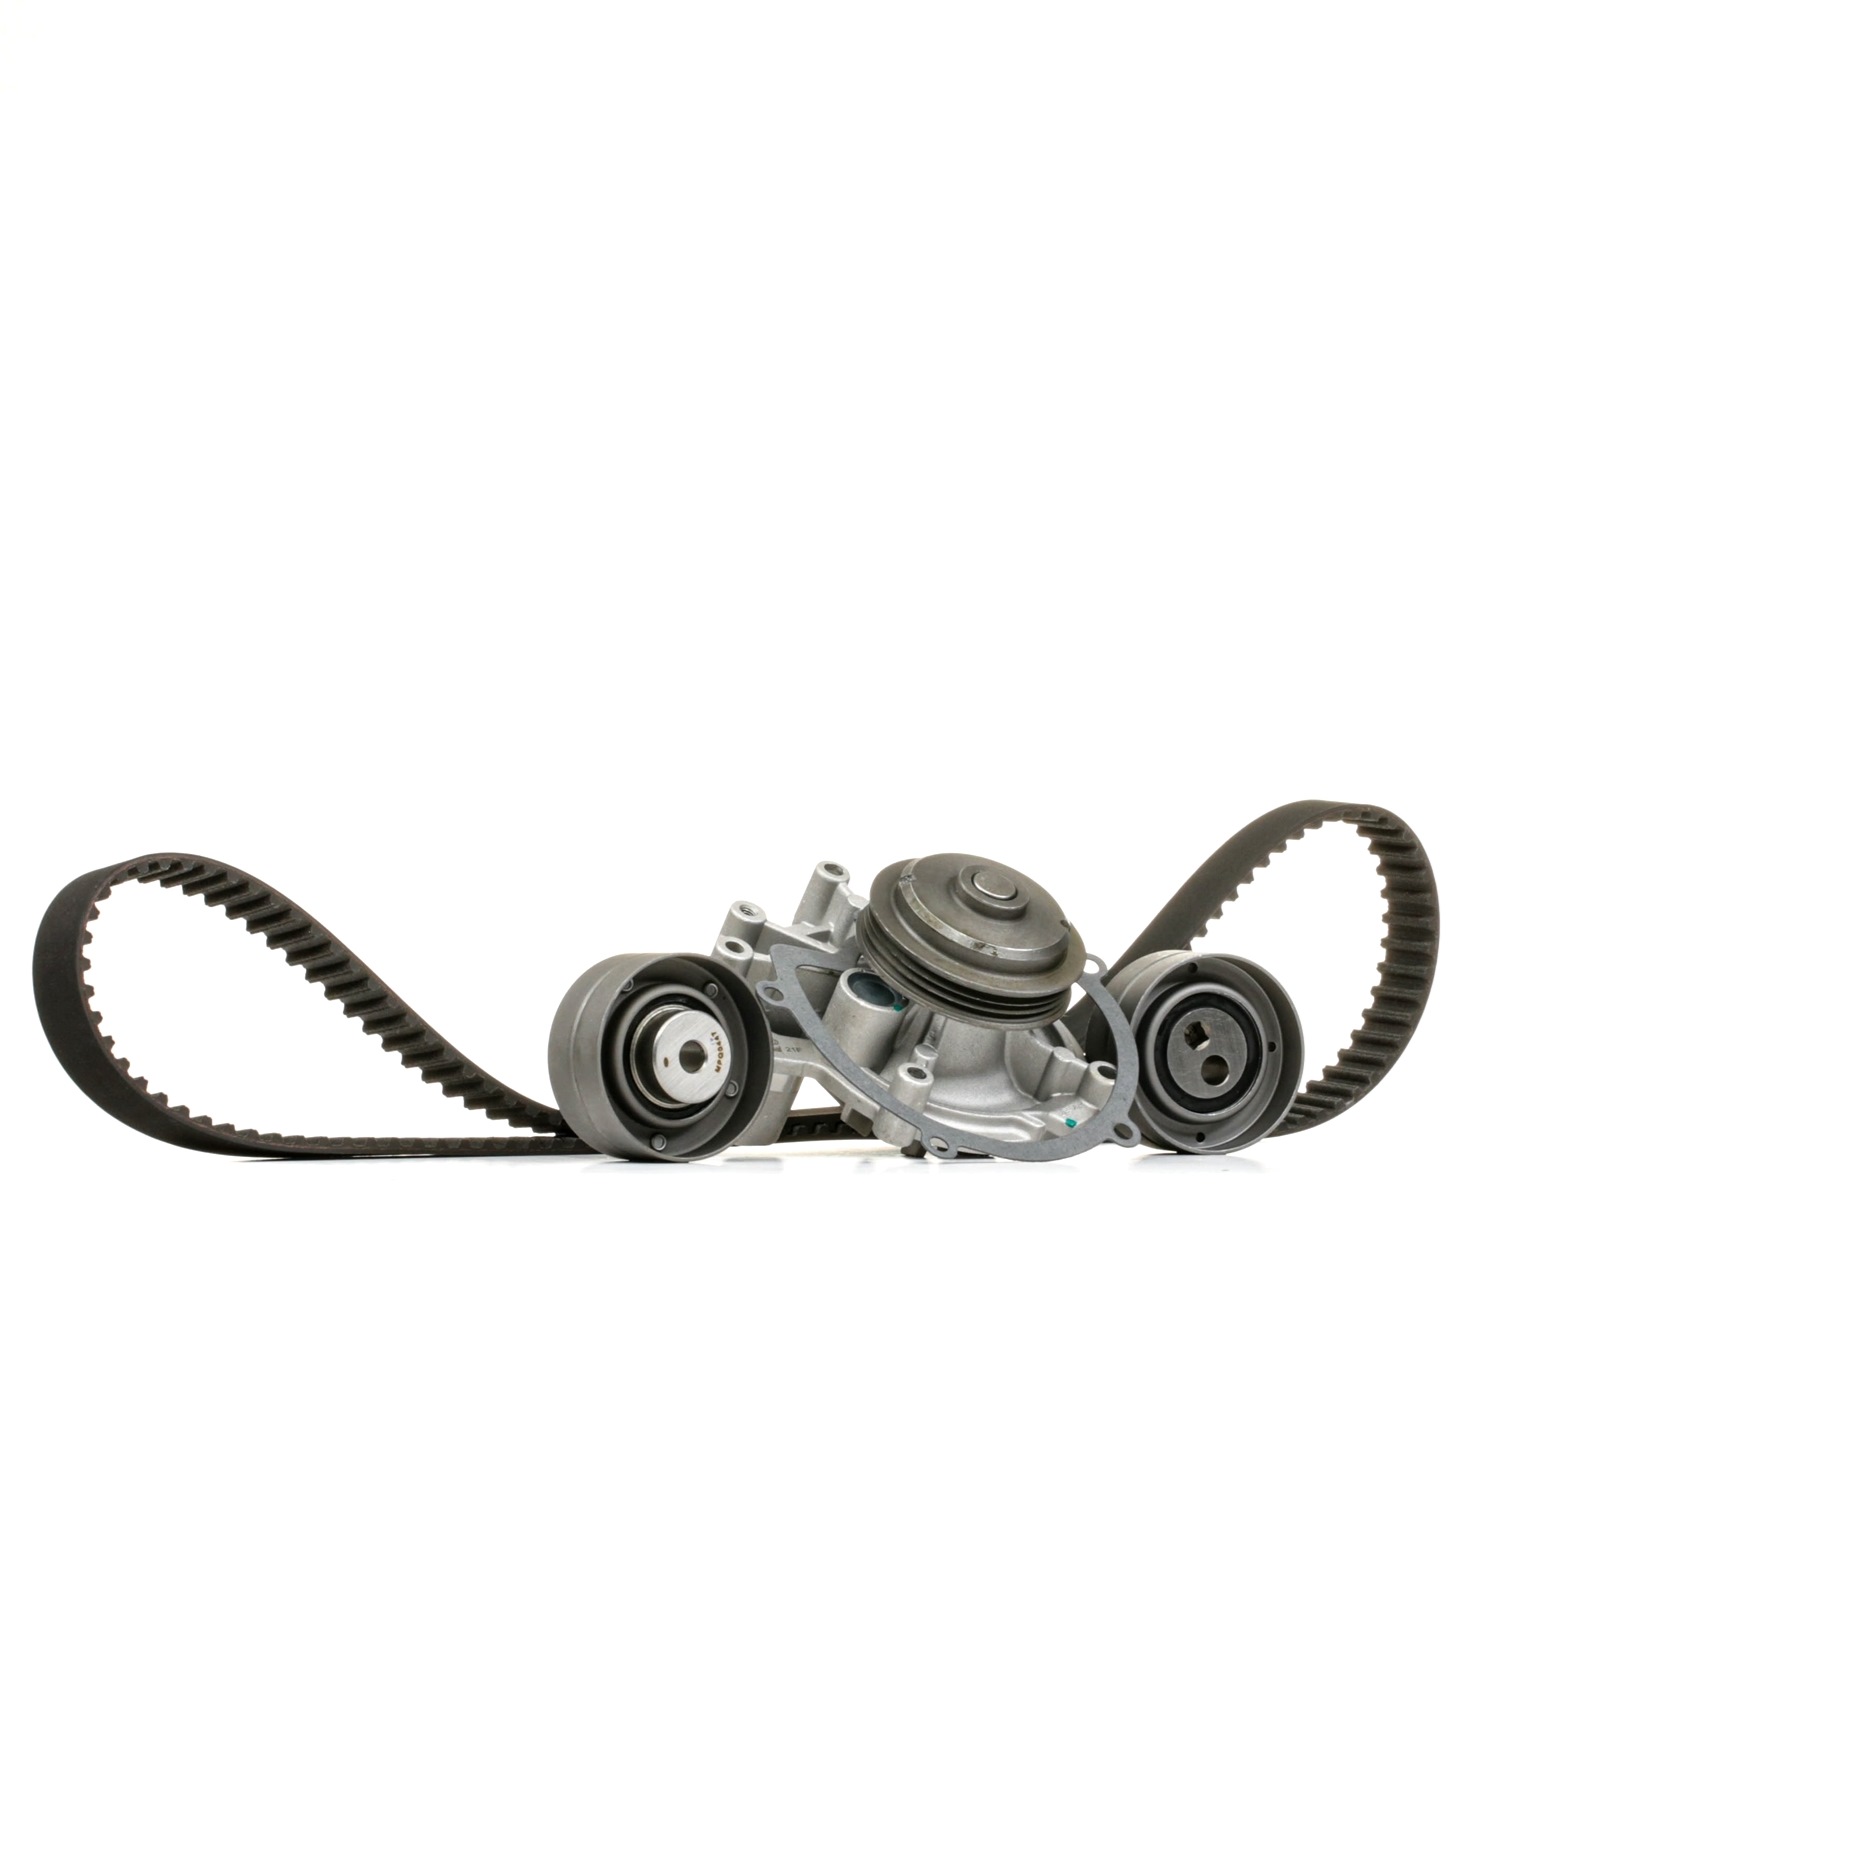 MAGNETI MARELLI 132011160004 Water pump and timing belt kit LAND ROVER experience and price